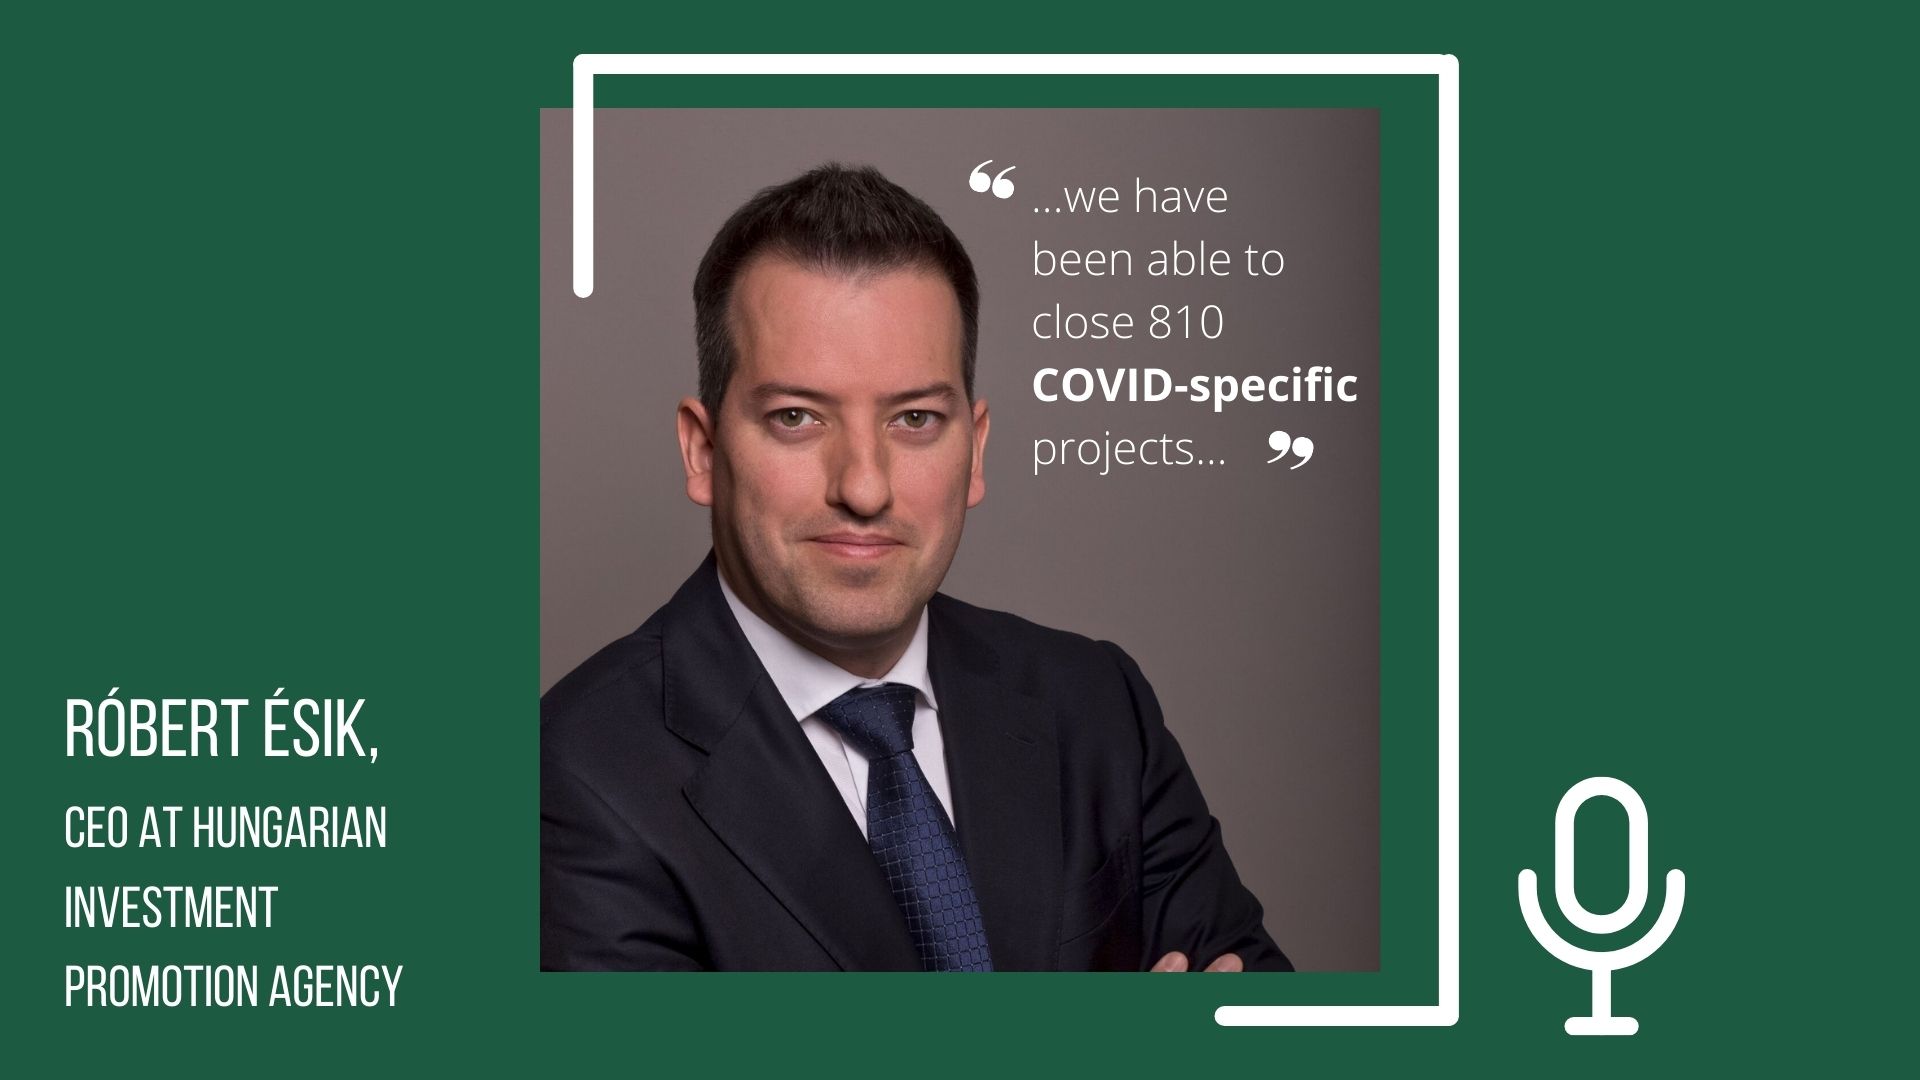 Foreign Investments In Hungary During The Covid19 Epidemic. A Conversation With Róbert Ésik, President Of HIPA